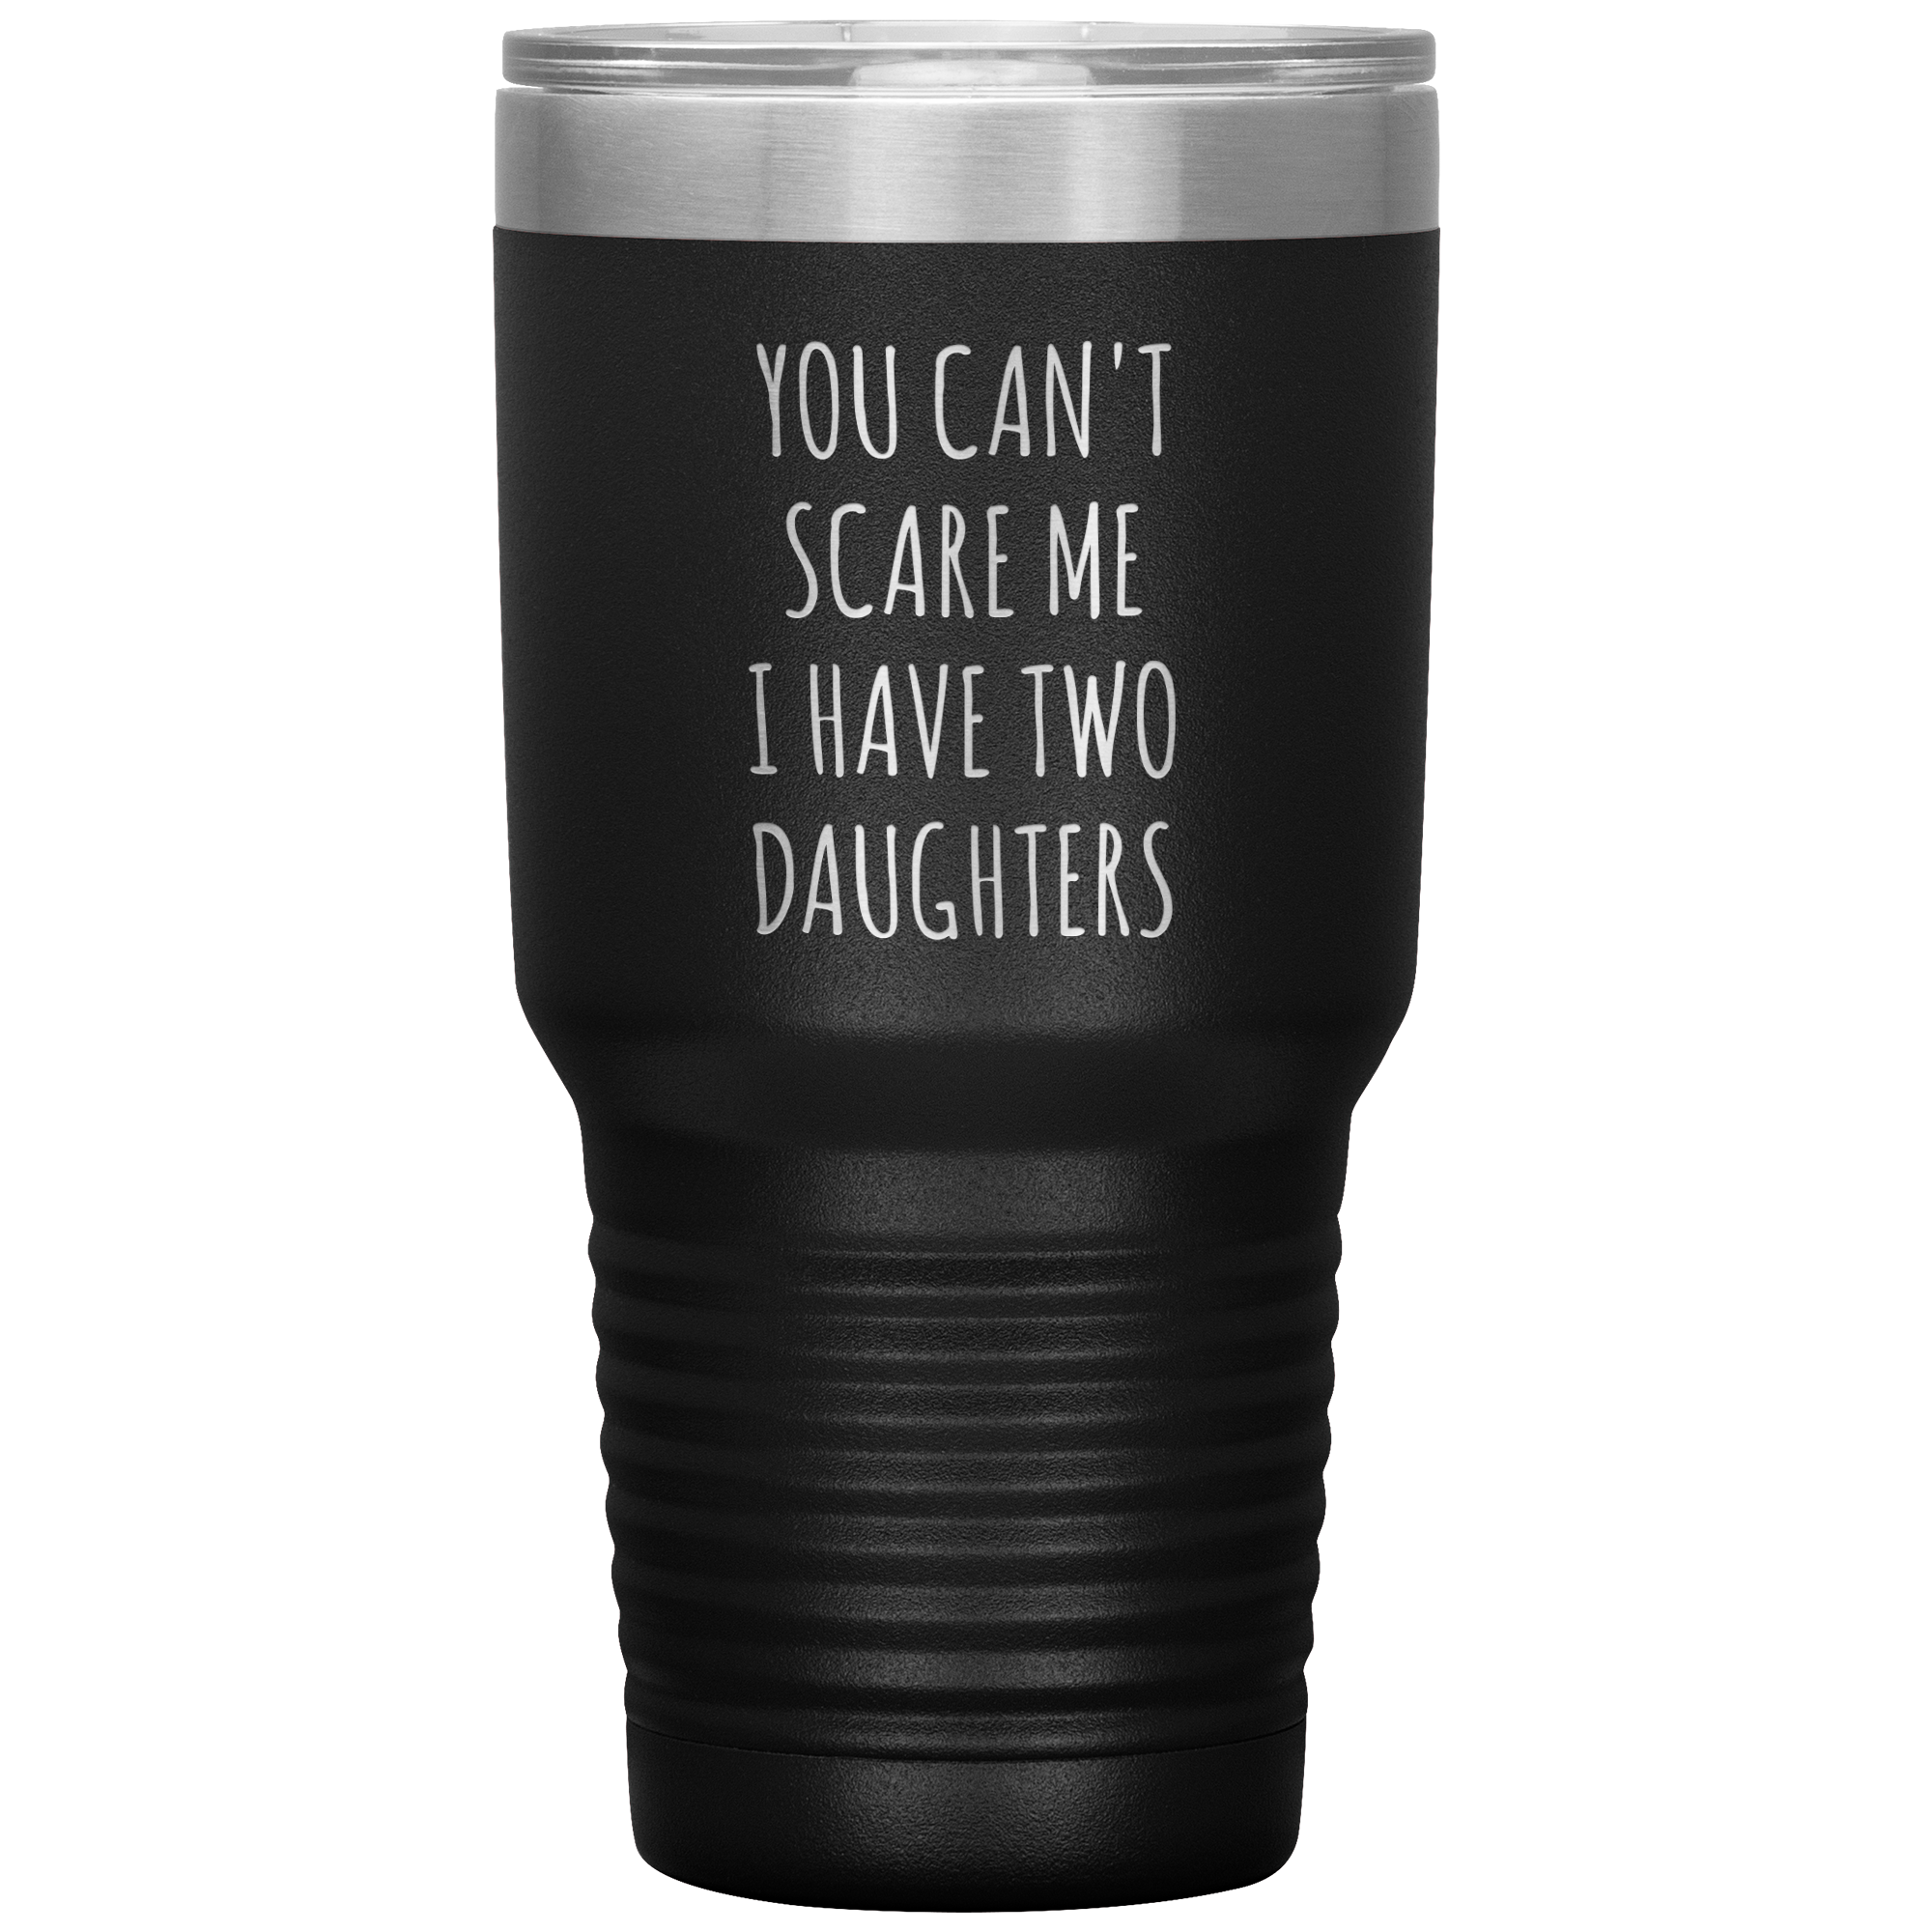 Father's Day Mug Gift You Can't Scare Me I Have Two Daughters Tumbler Funny Travel Cup 30oz BPA Free